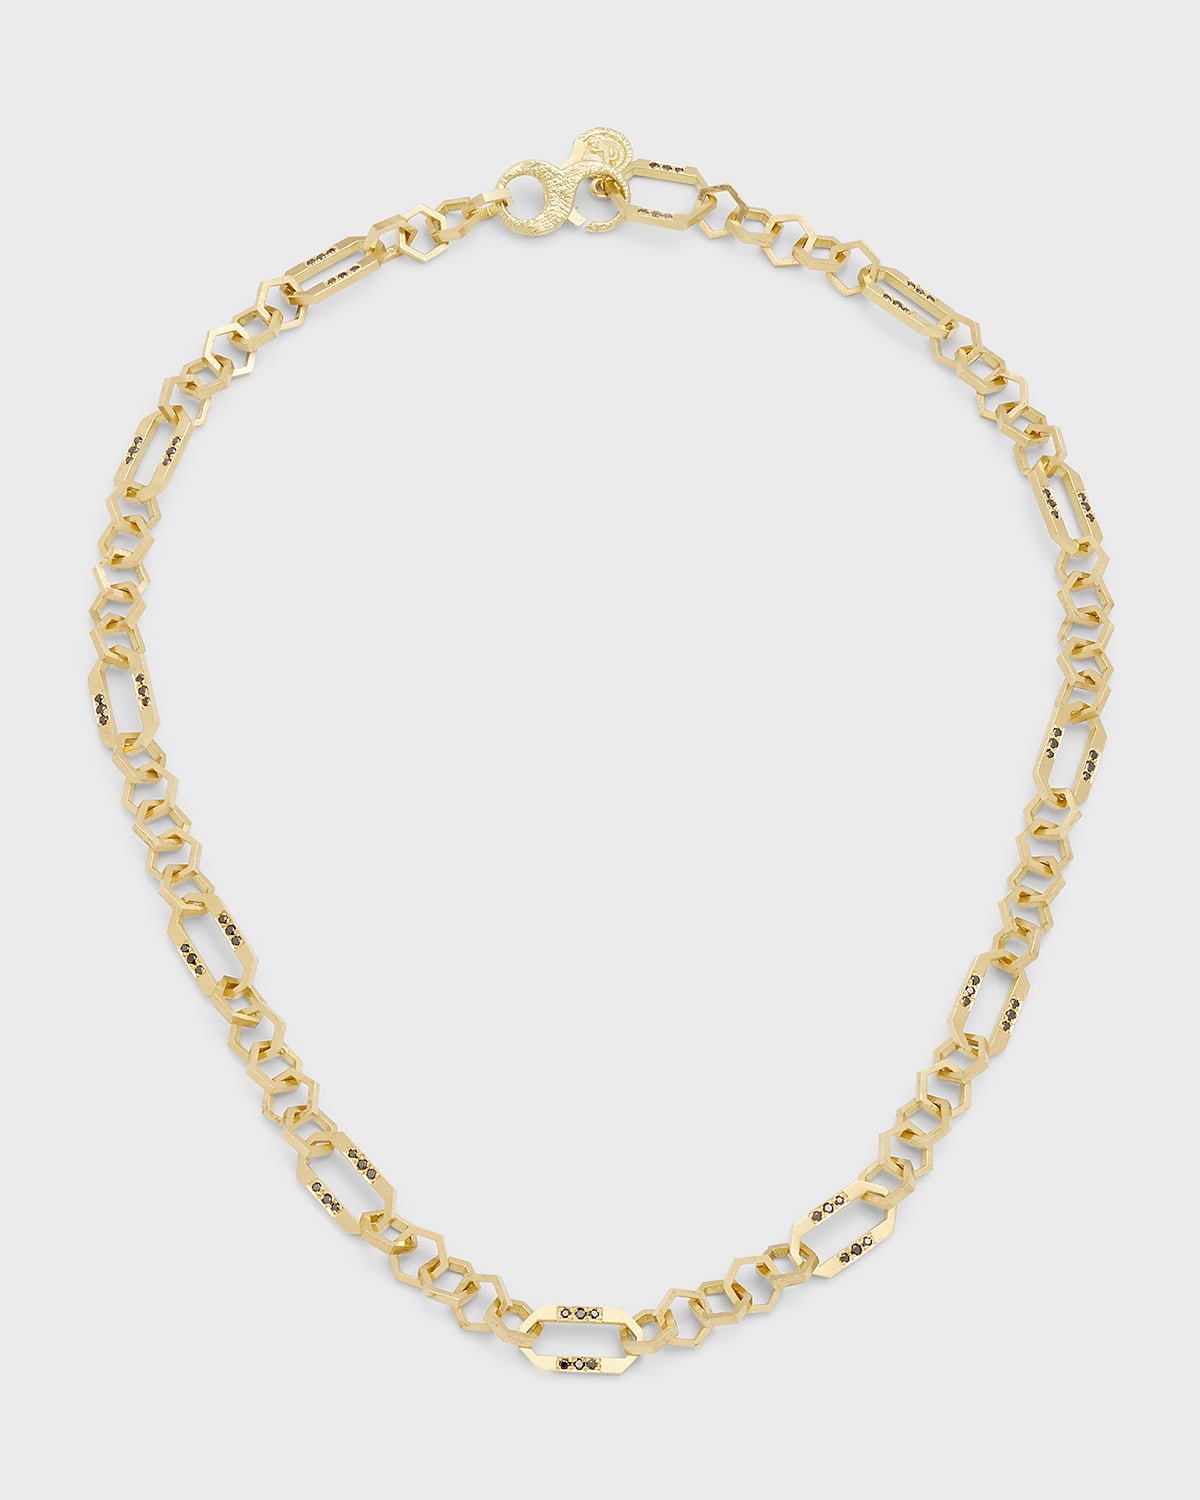 18K Yellow Gold Timepiece Chain Necklace With Black Diamonds